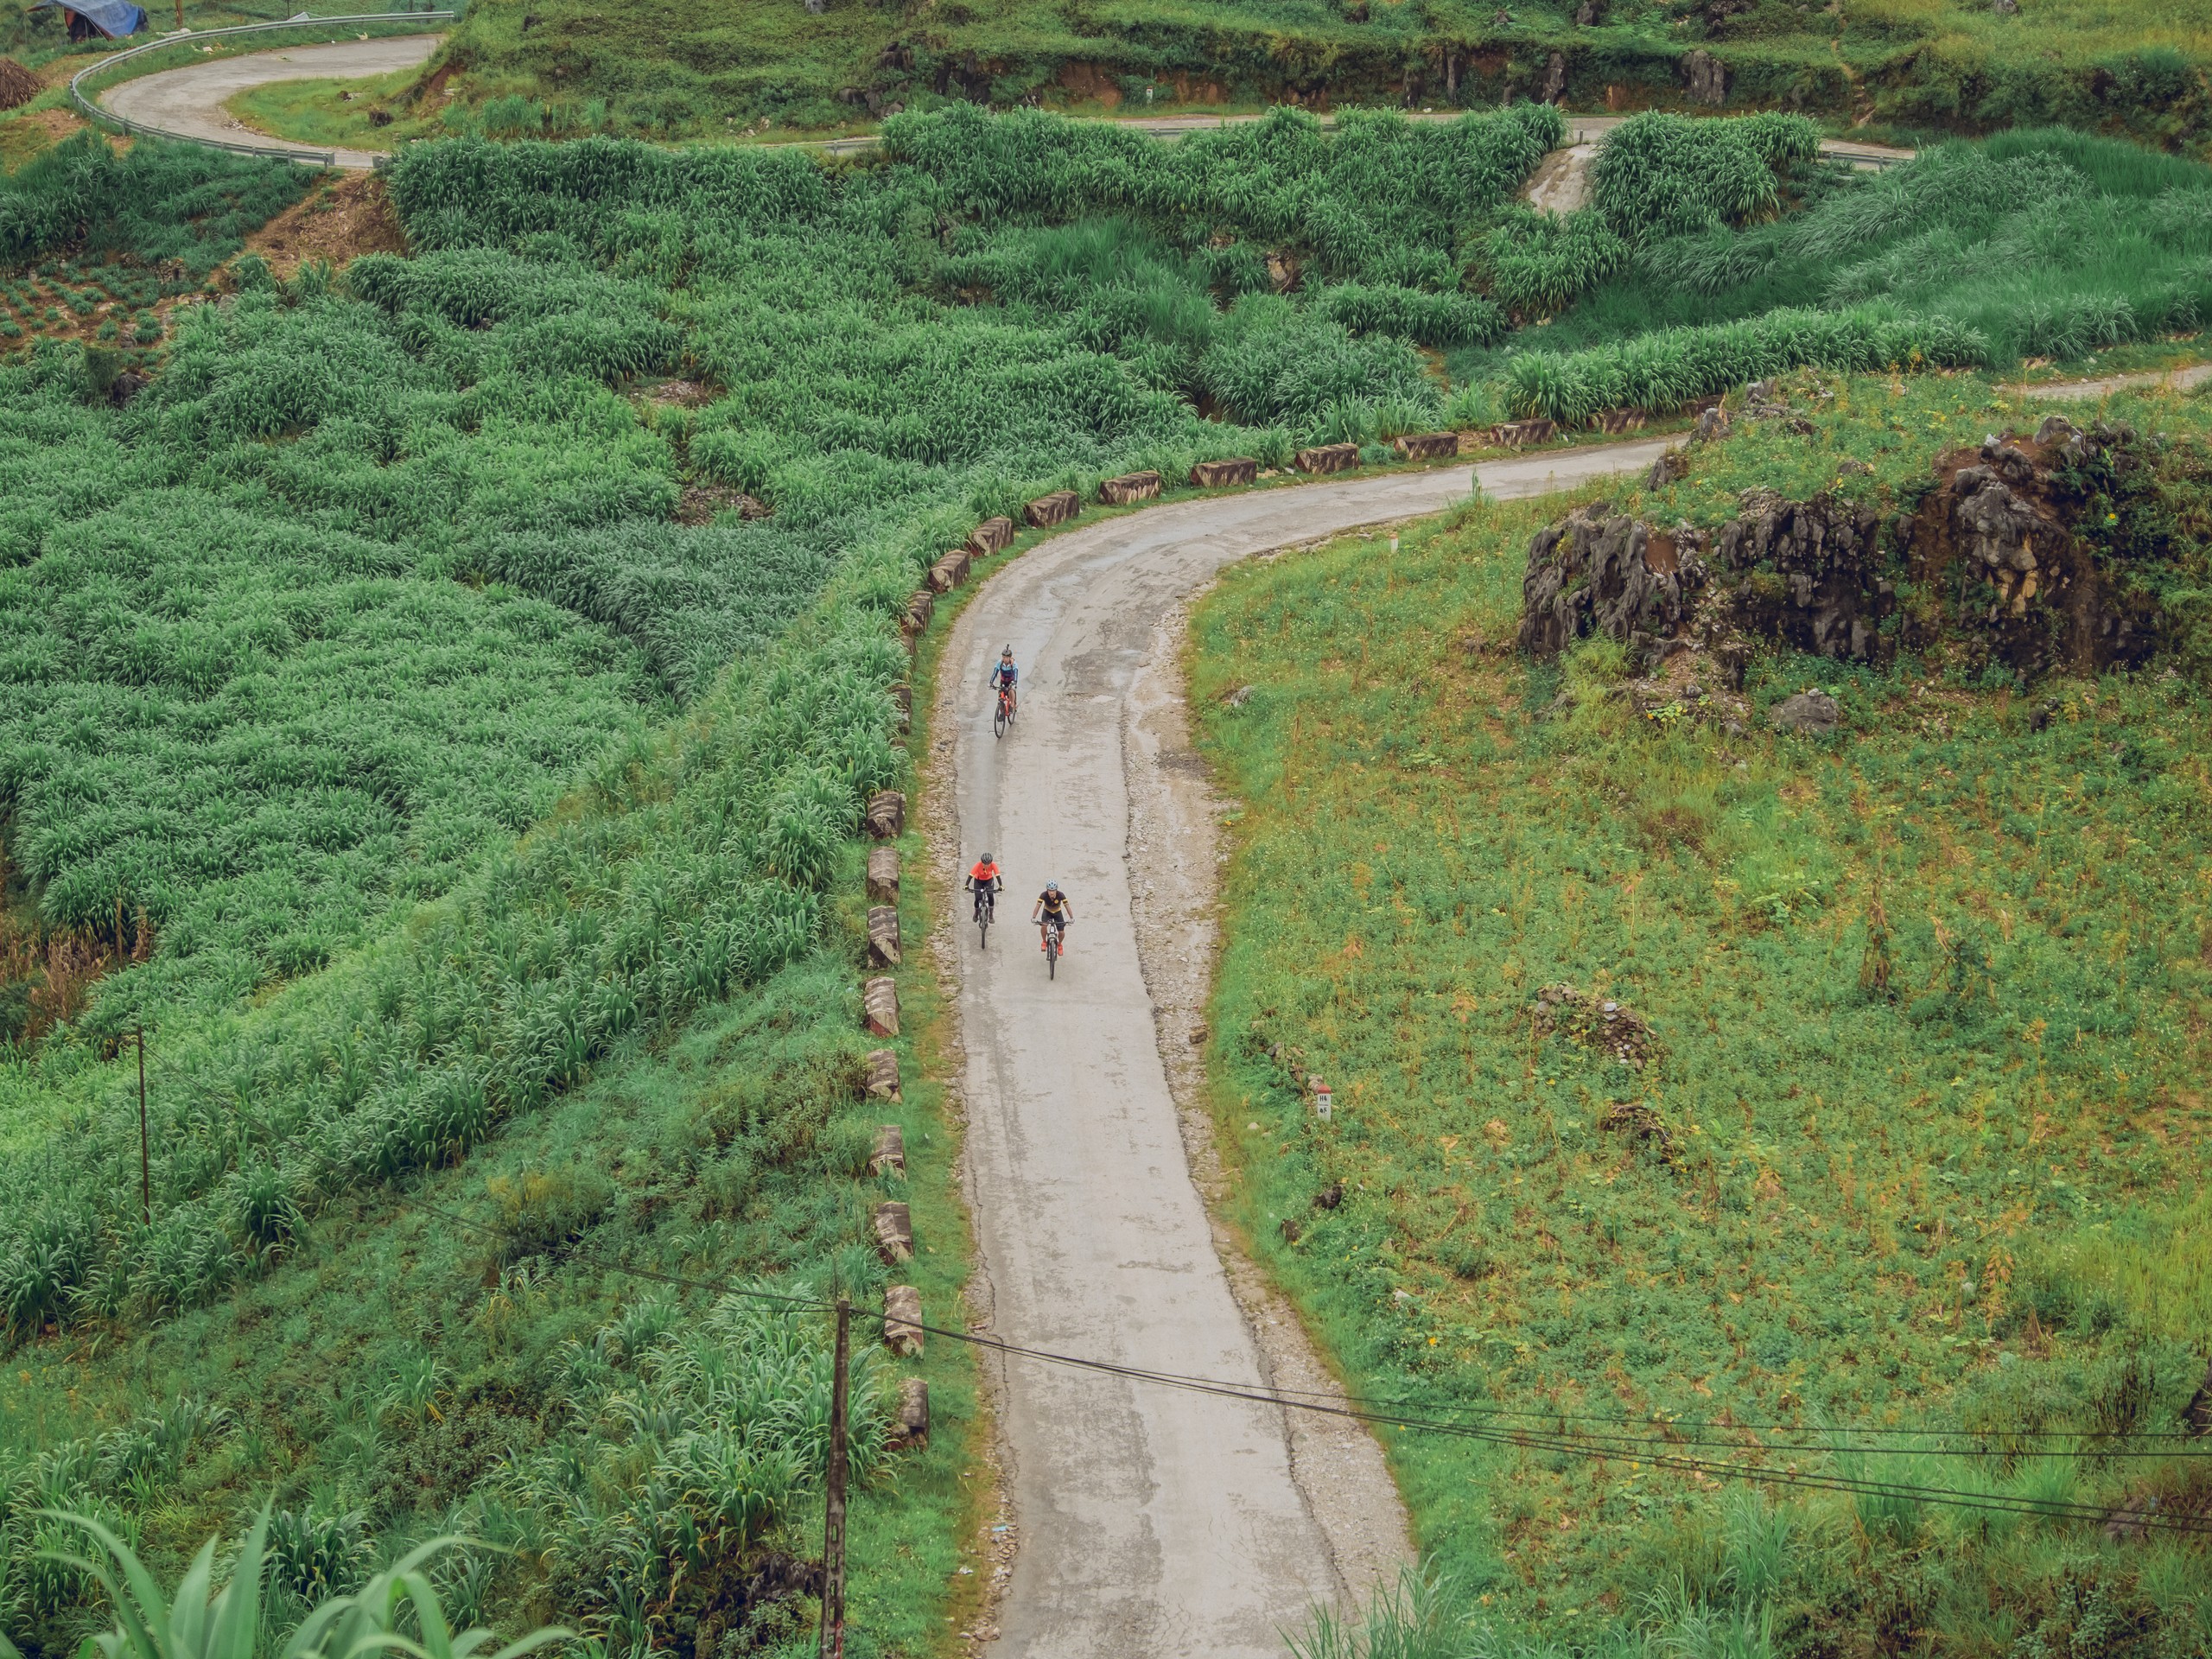 Riding the hidden routes of Northern Vietnam